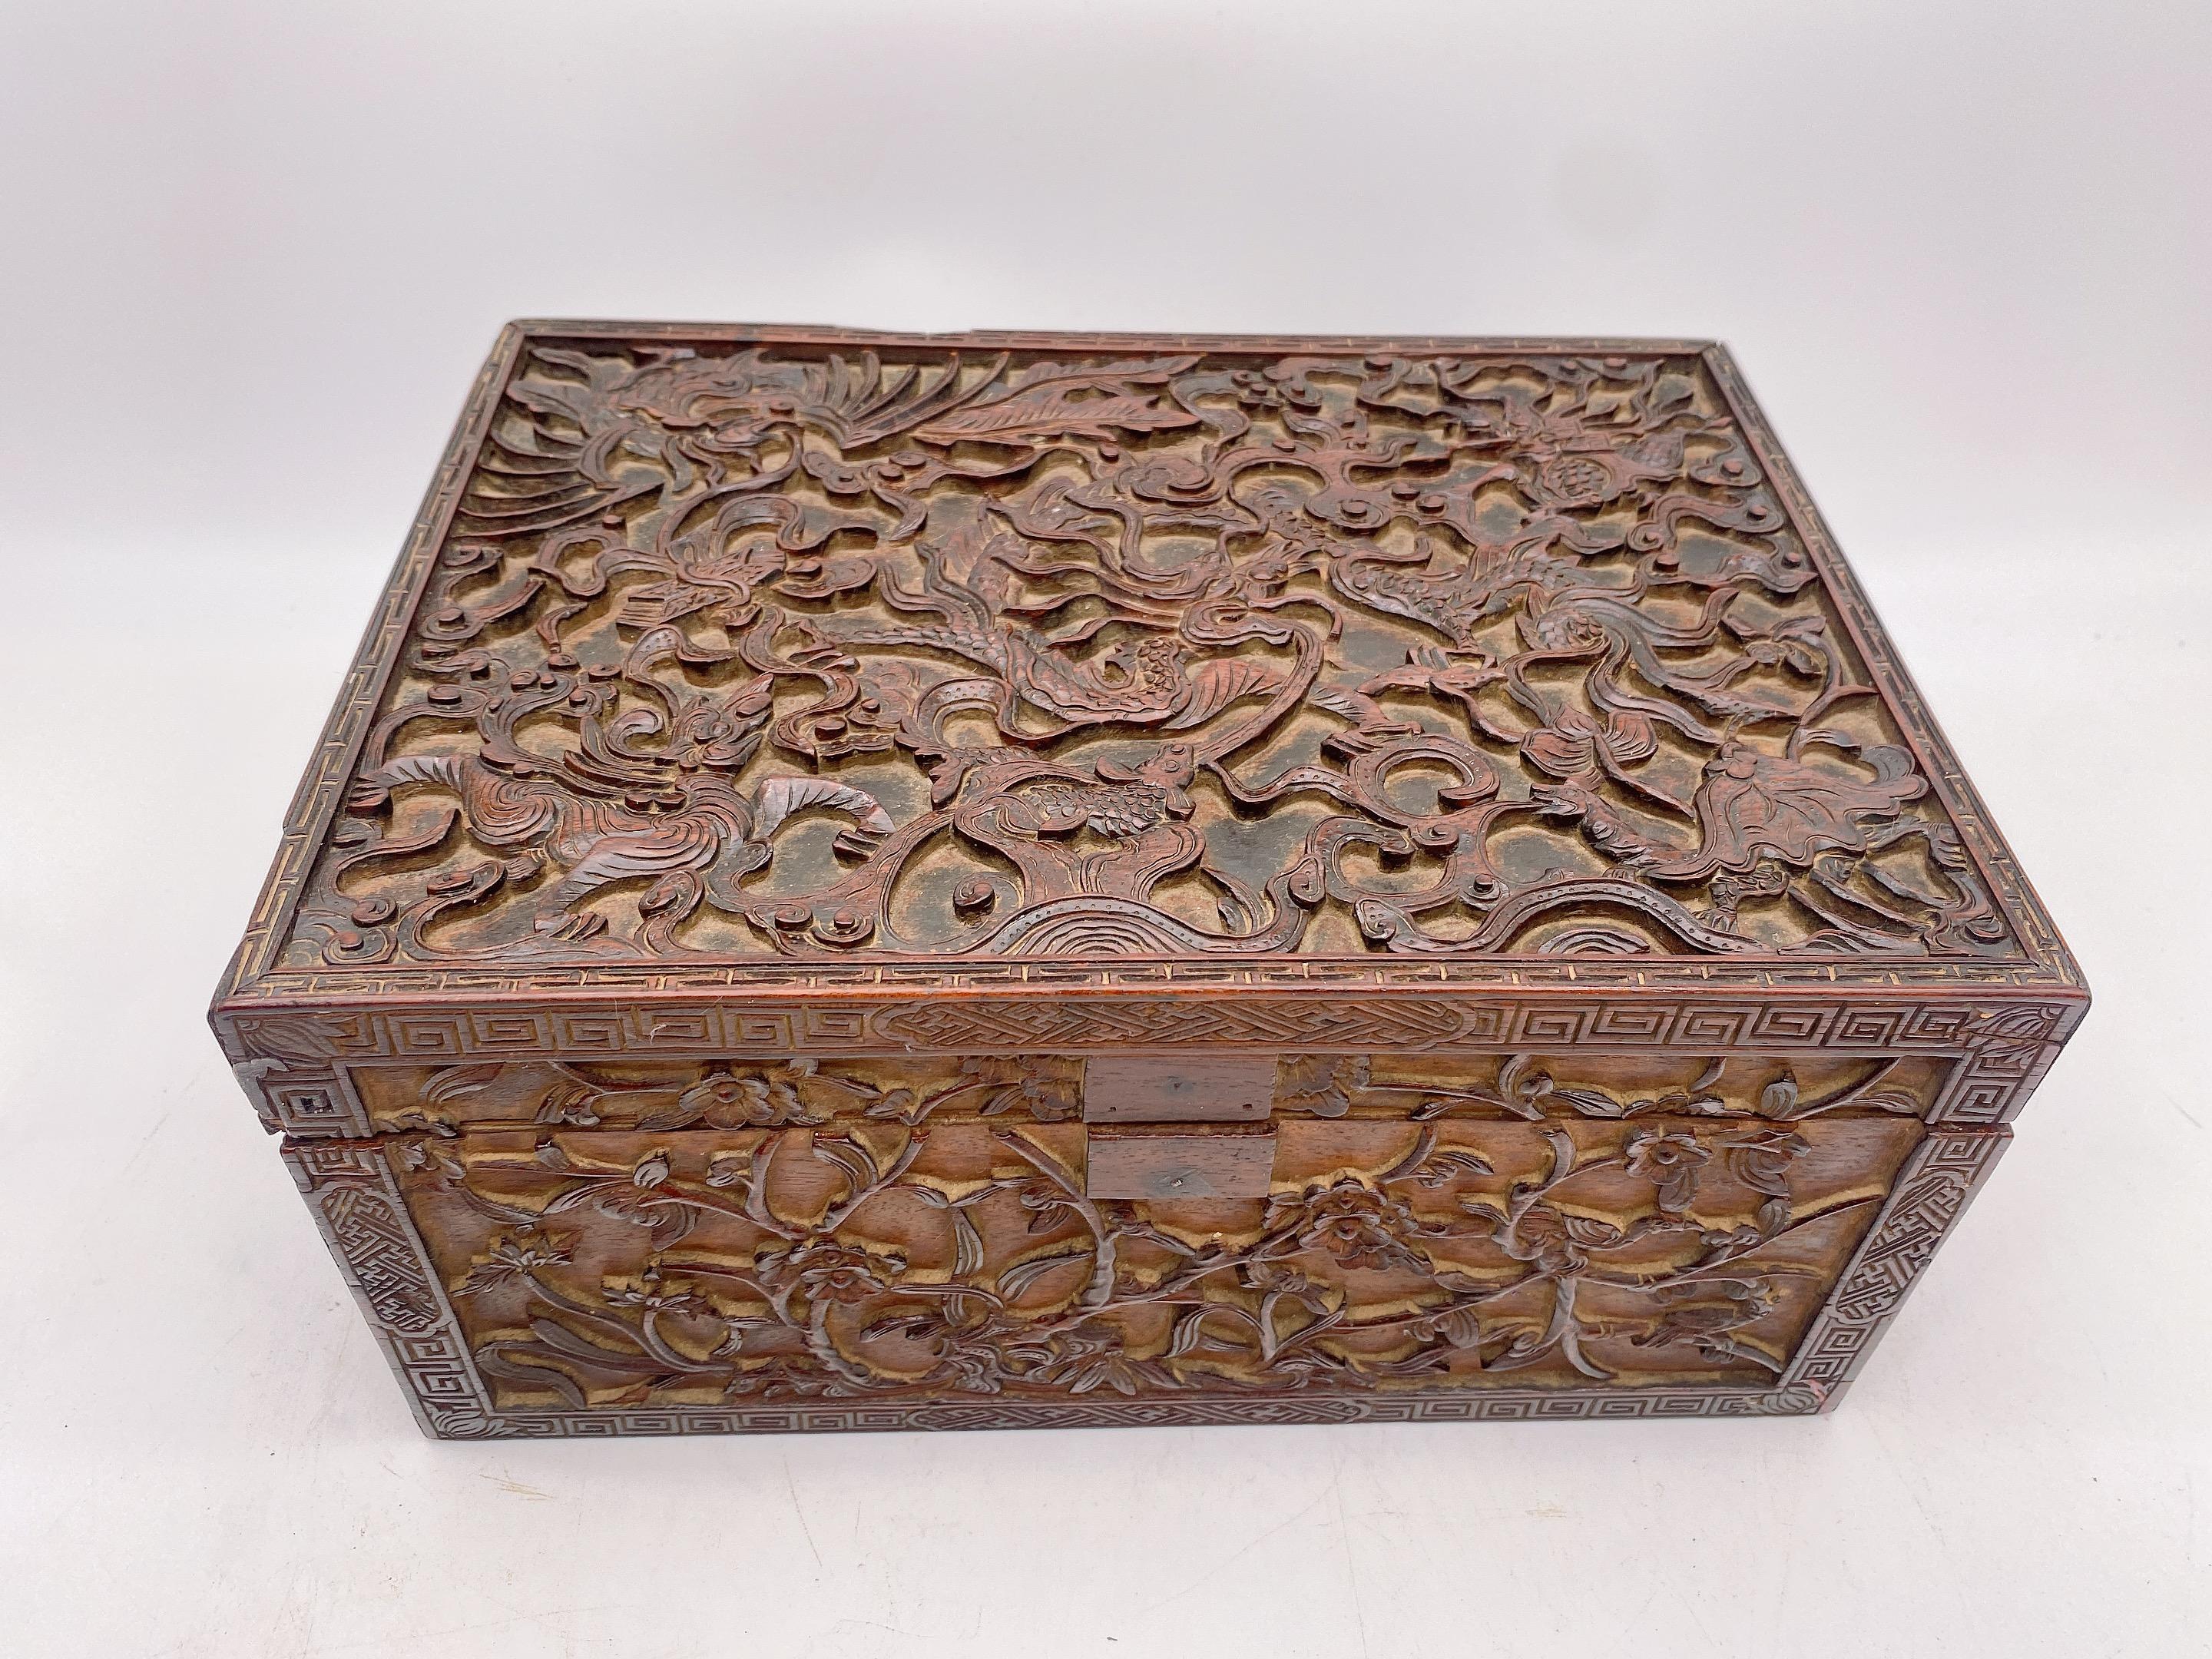 19th Century Chinese wooden rectangular 'Mythical Beasts' Box , it is maybe Zitan wood box, The hinged cover carved with a dragon, a phoenix, a qilin, a tortoise a fish and other creatures among stylised smoke, the sides with birds lurking amidst